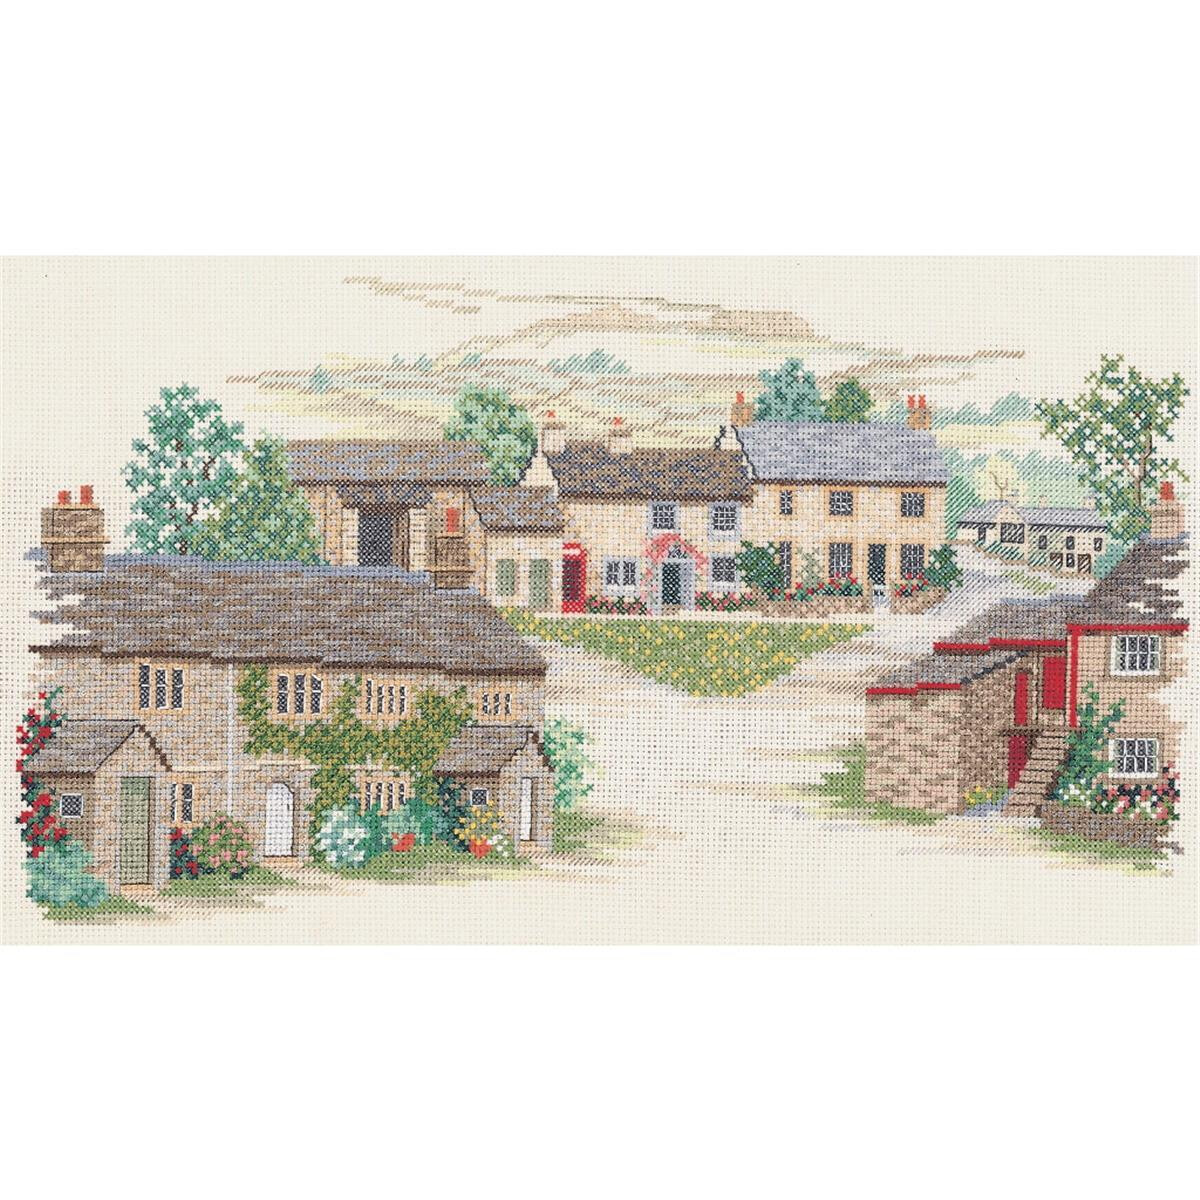 Bothy Threads counted cross stitch Kit "Village...